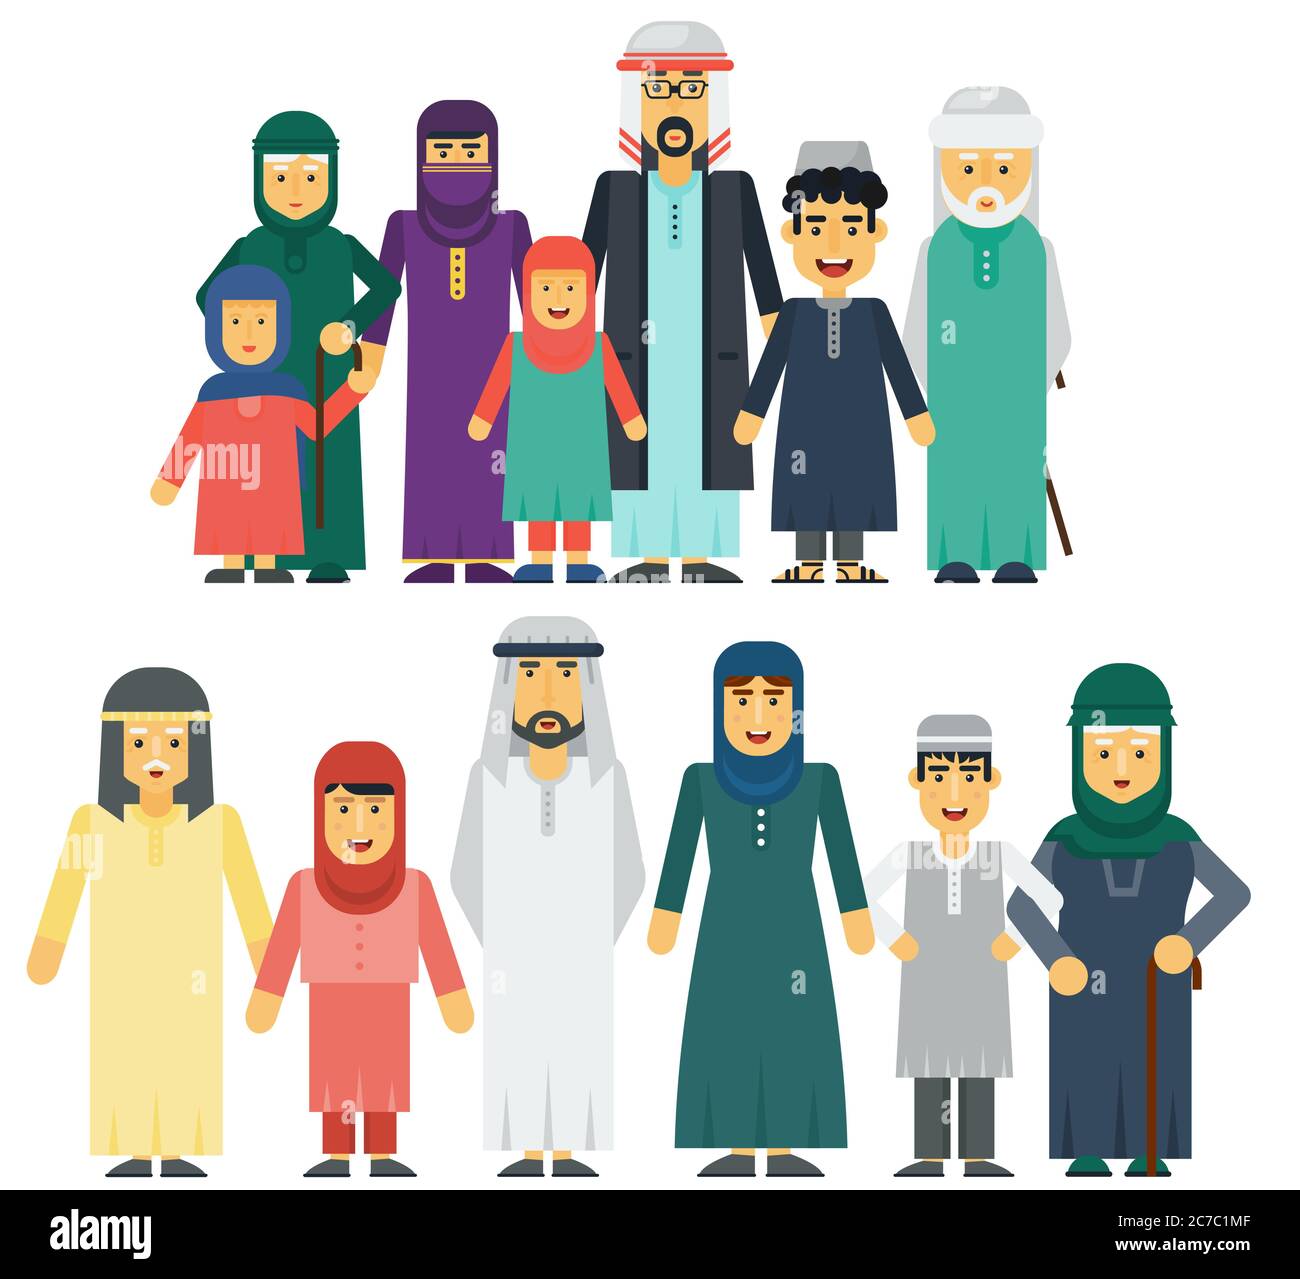 Muslim people father, mother, grandmother, grandfather, son and daughter standing together. Traditional islamic muslim family vector illustration Stock Vector